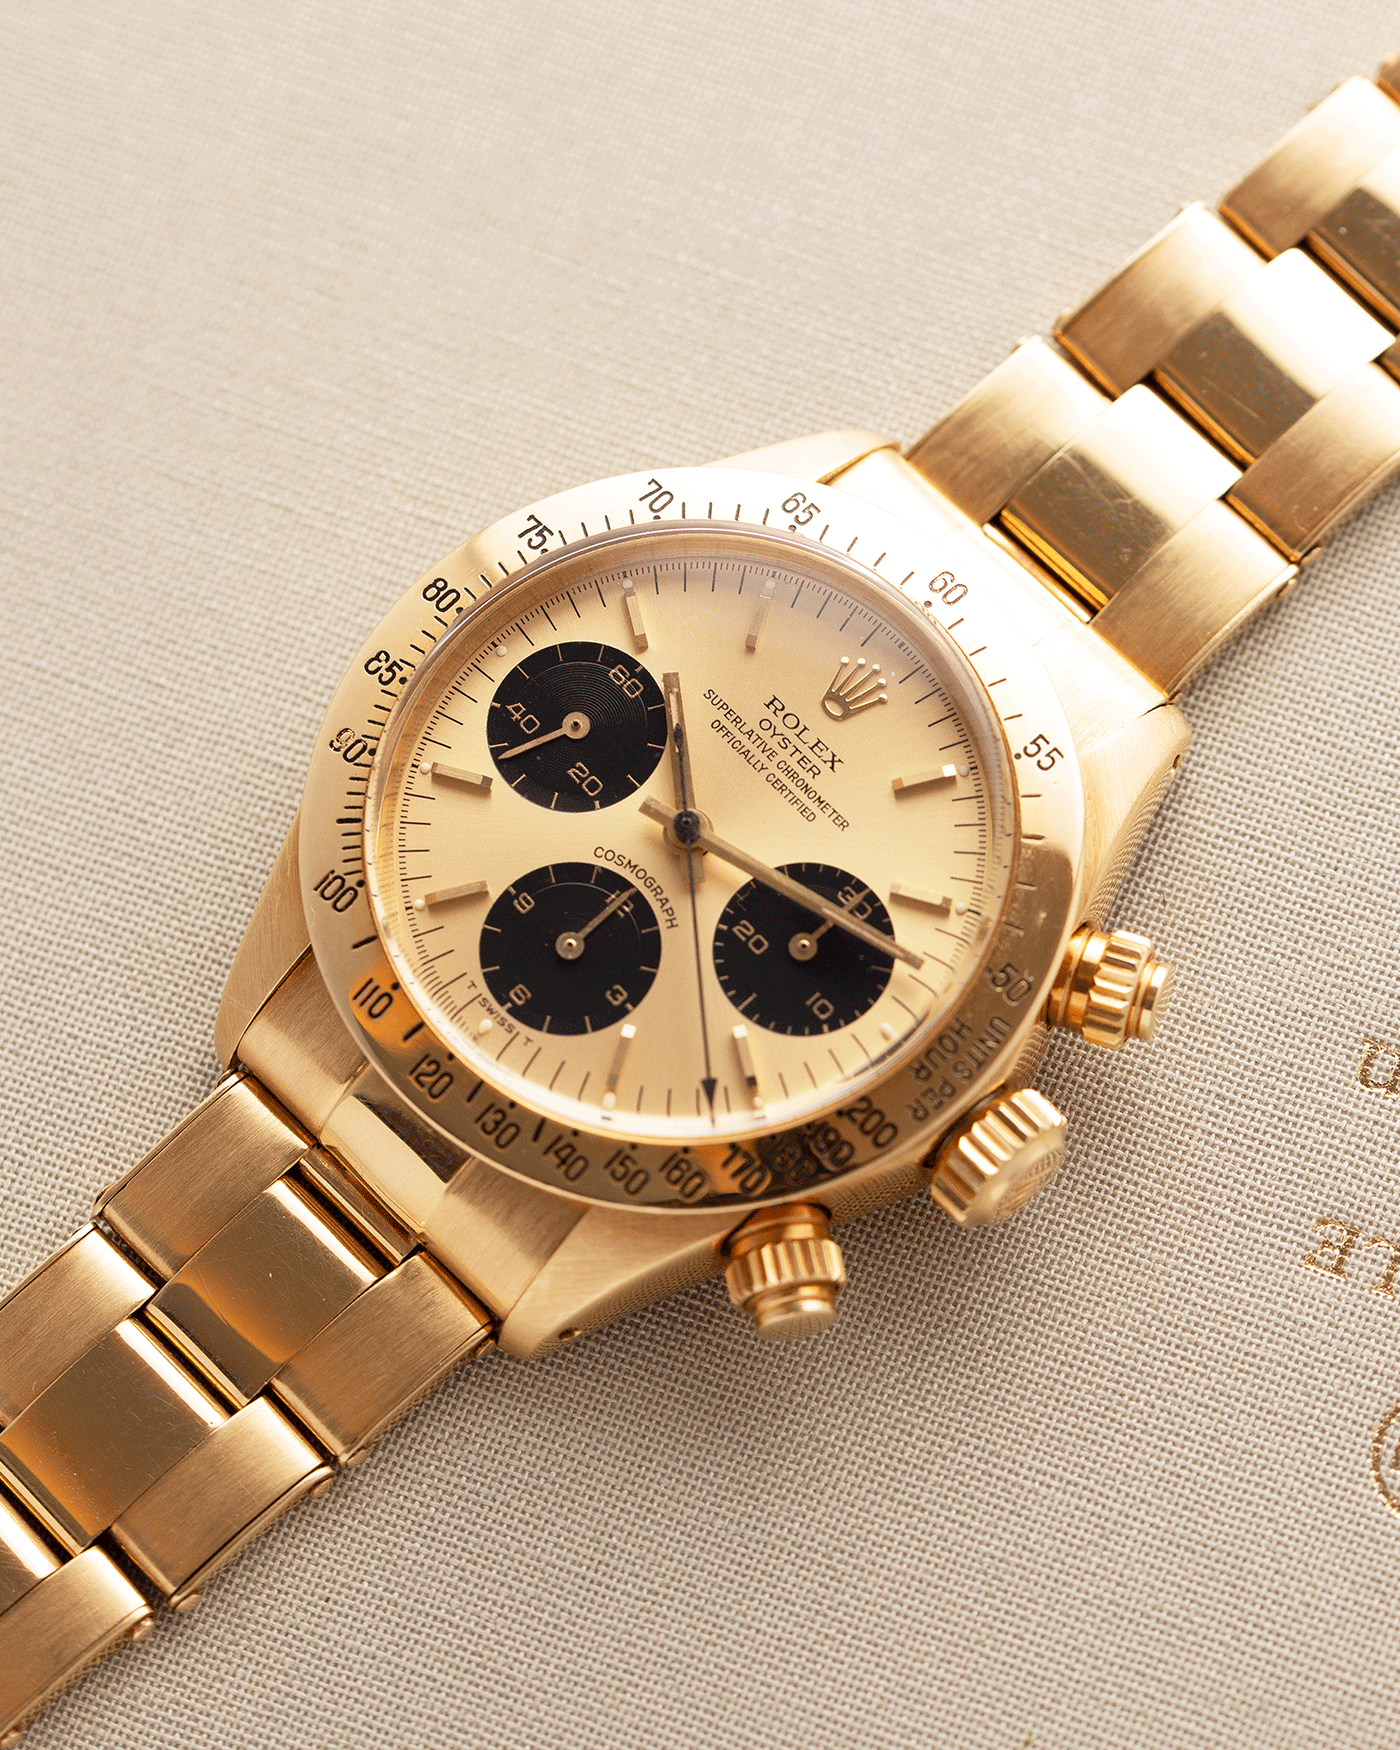 Rolex Cosmograph Daytona 6265 Vintage Yellow Gold Chronograph Watch | S.Song Vintage Timepieces 